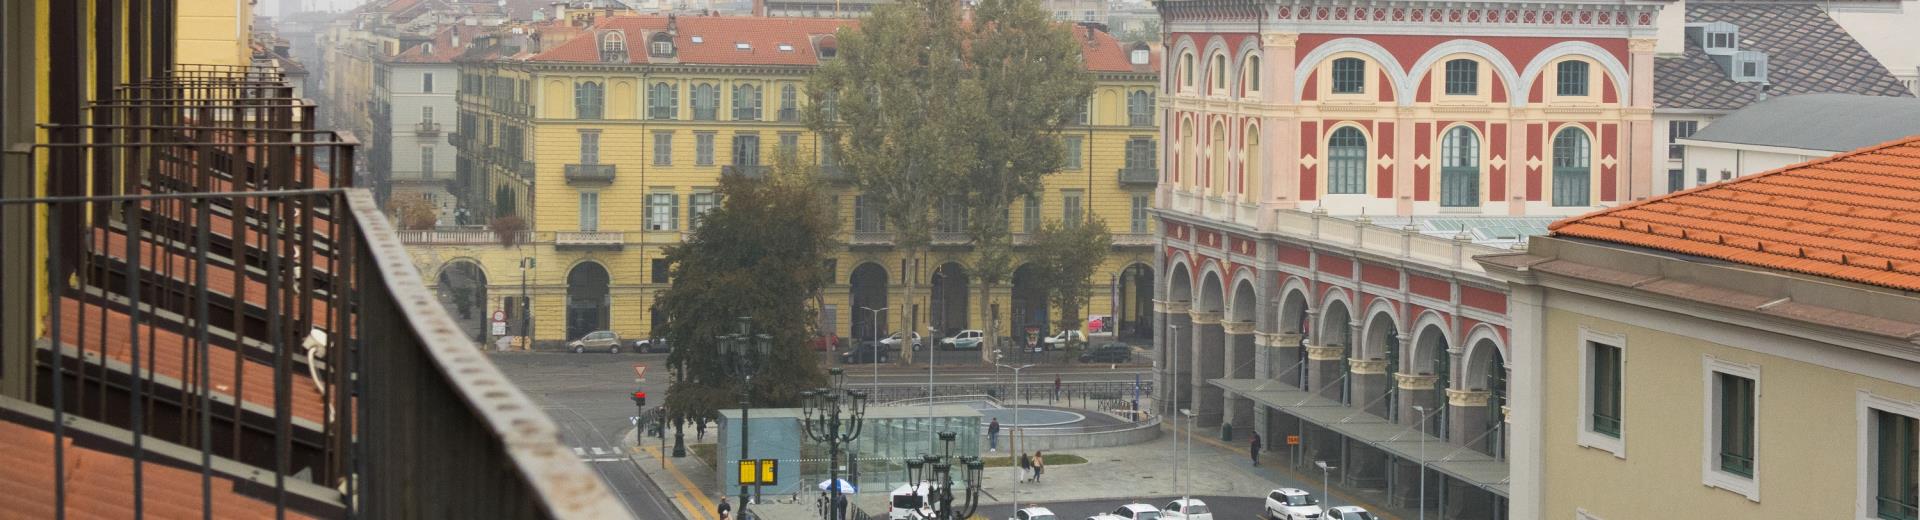 Porta Nuova and the parking